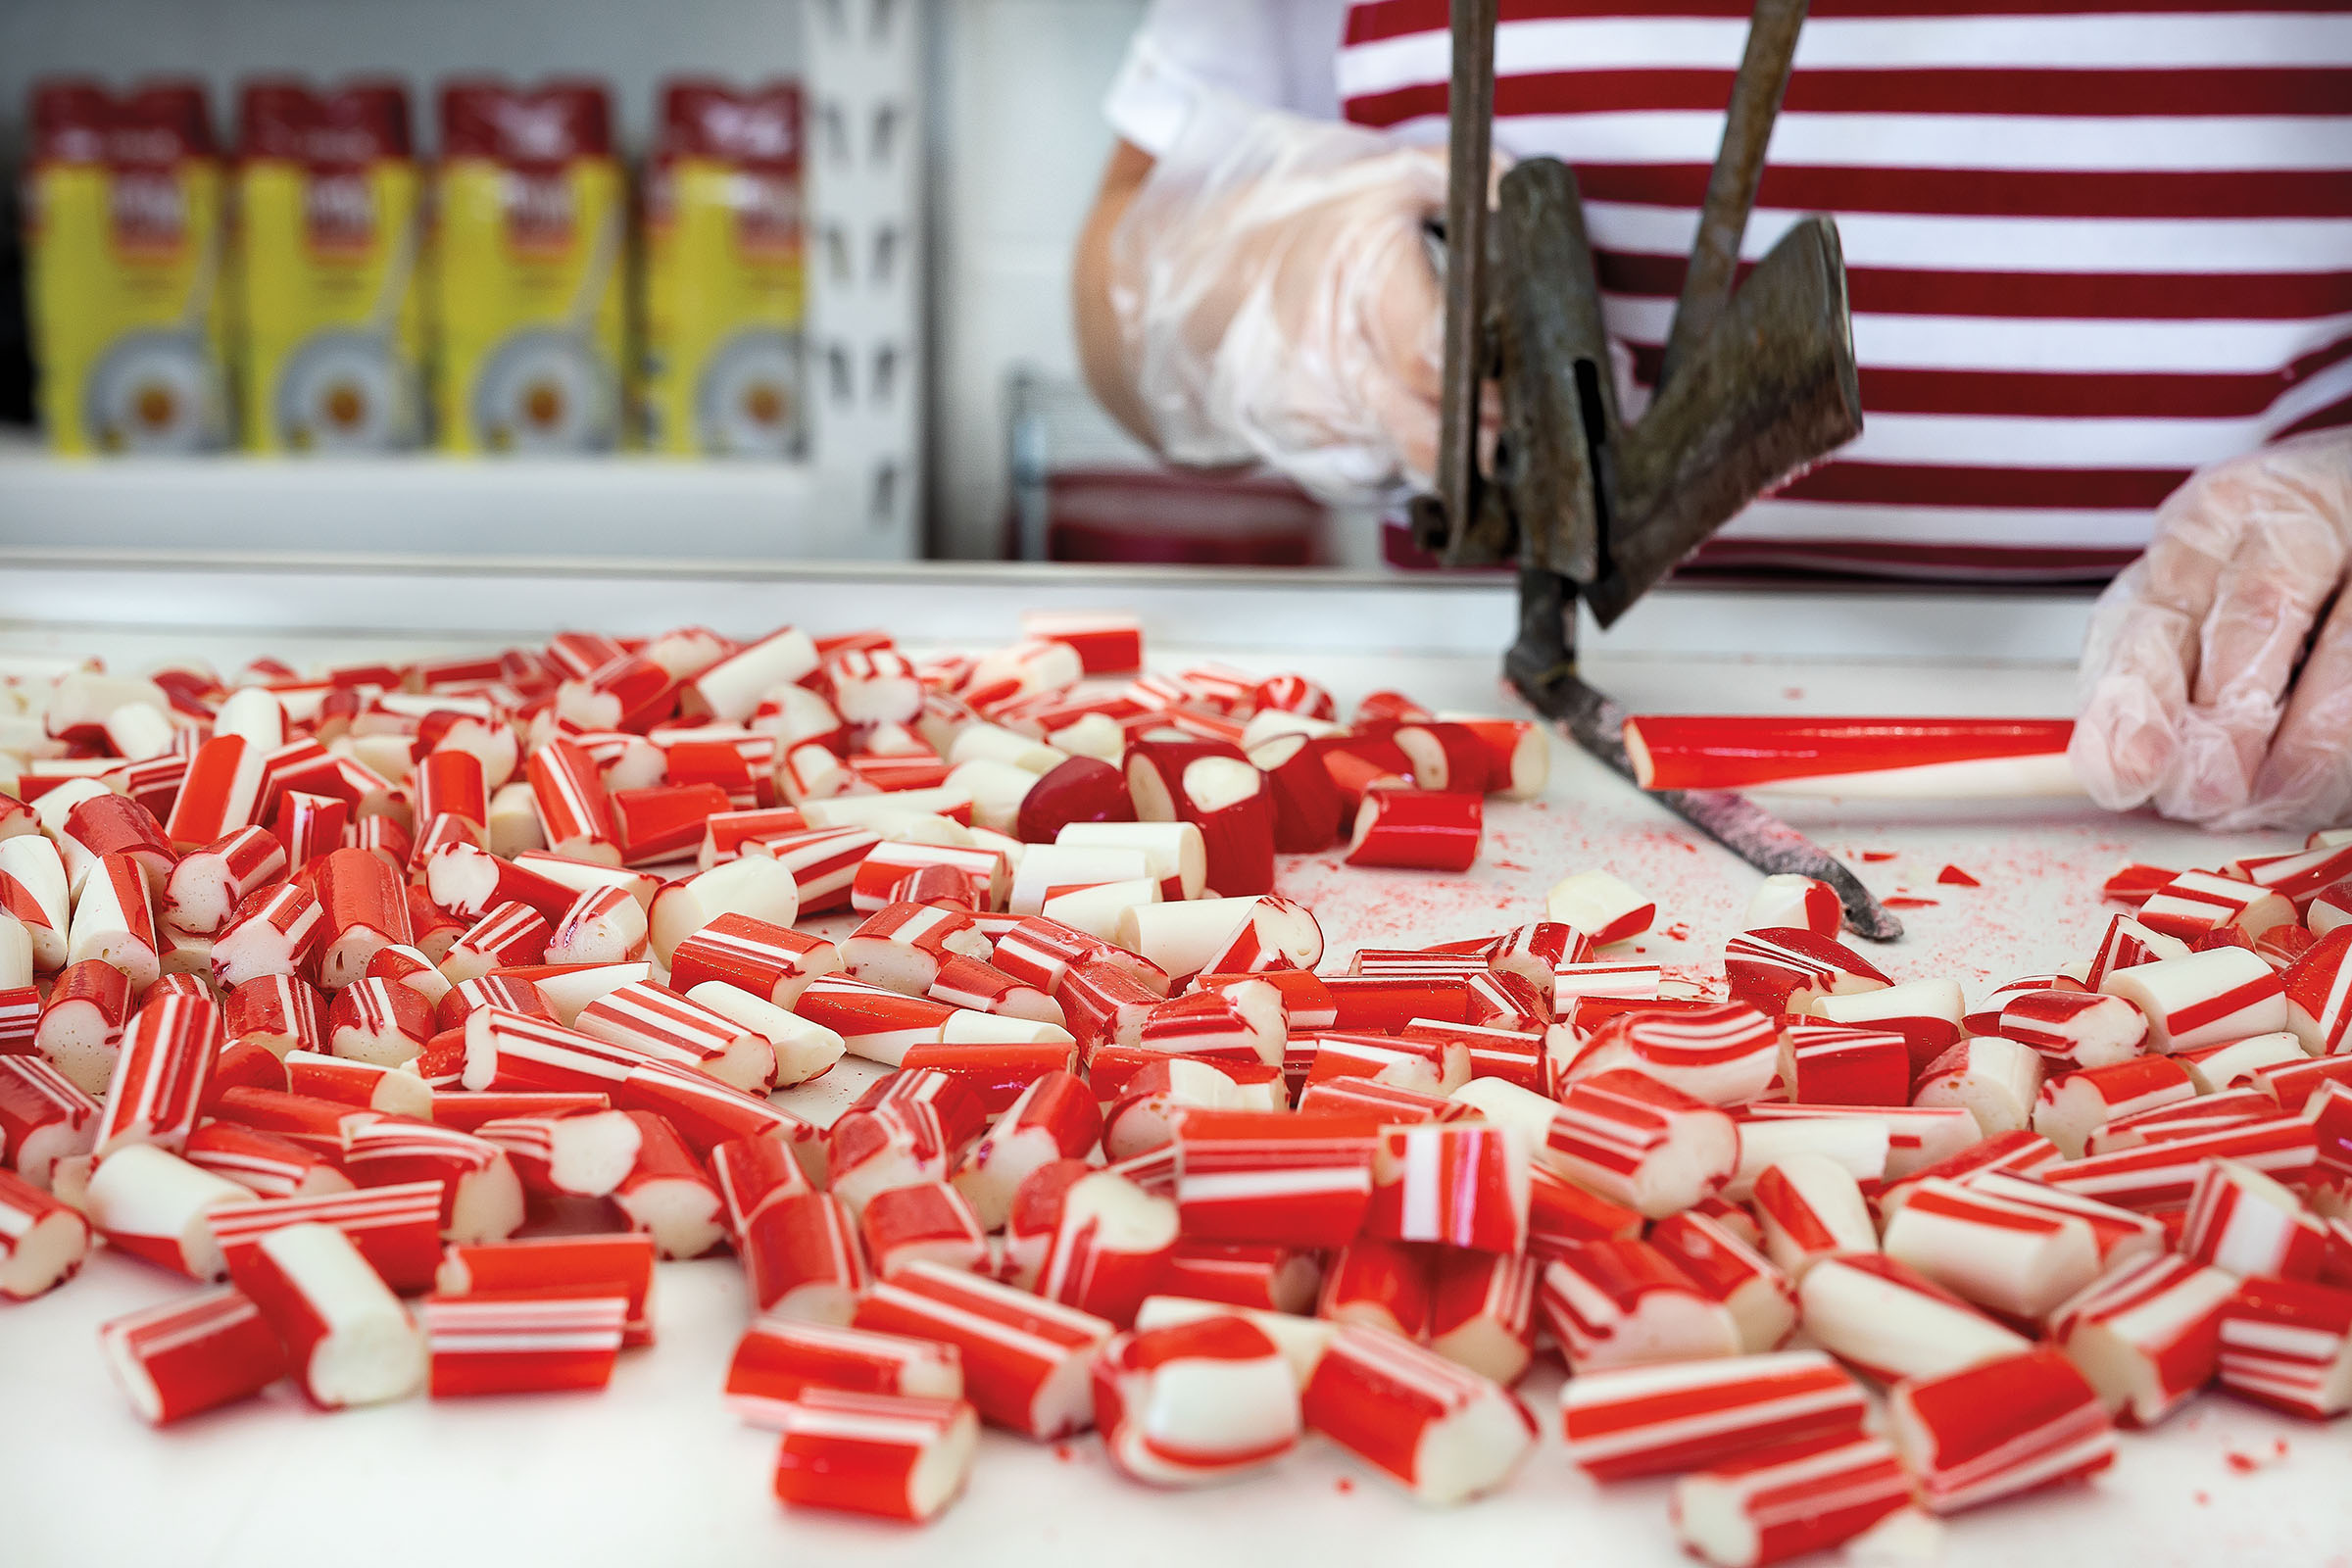 A pile of bright red and white candies